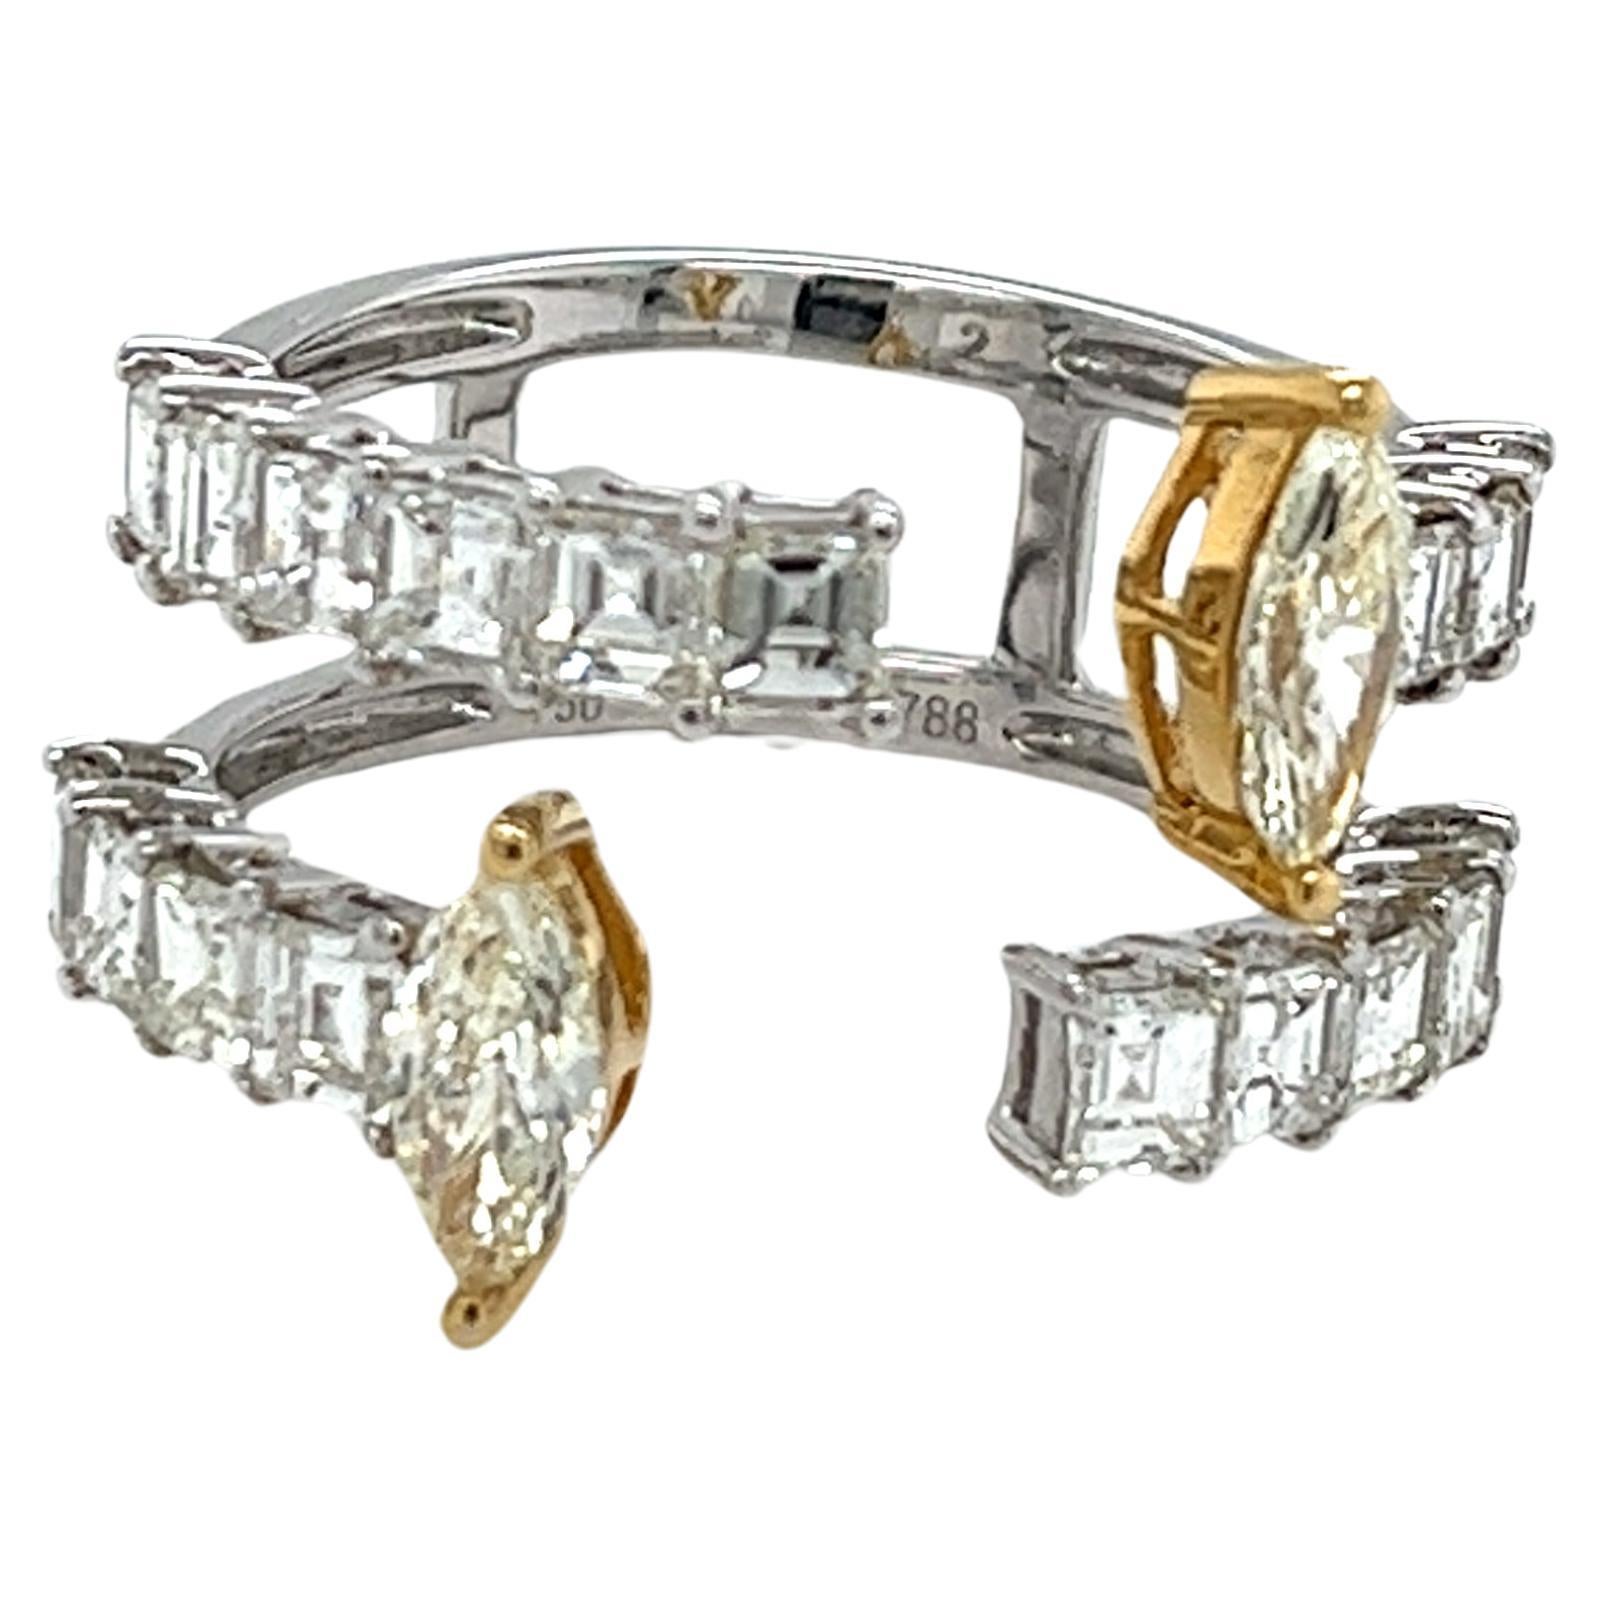 18Kt White and Yellow Gold Ring with diamons 2.79 cts. For Sale